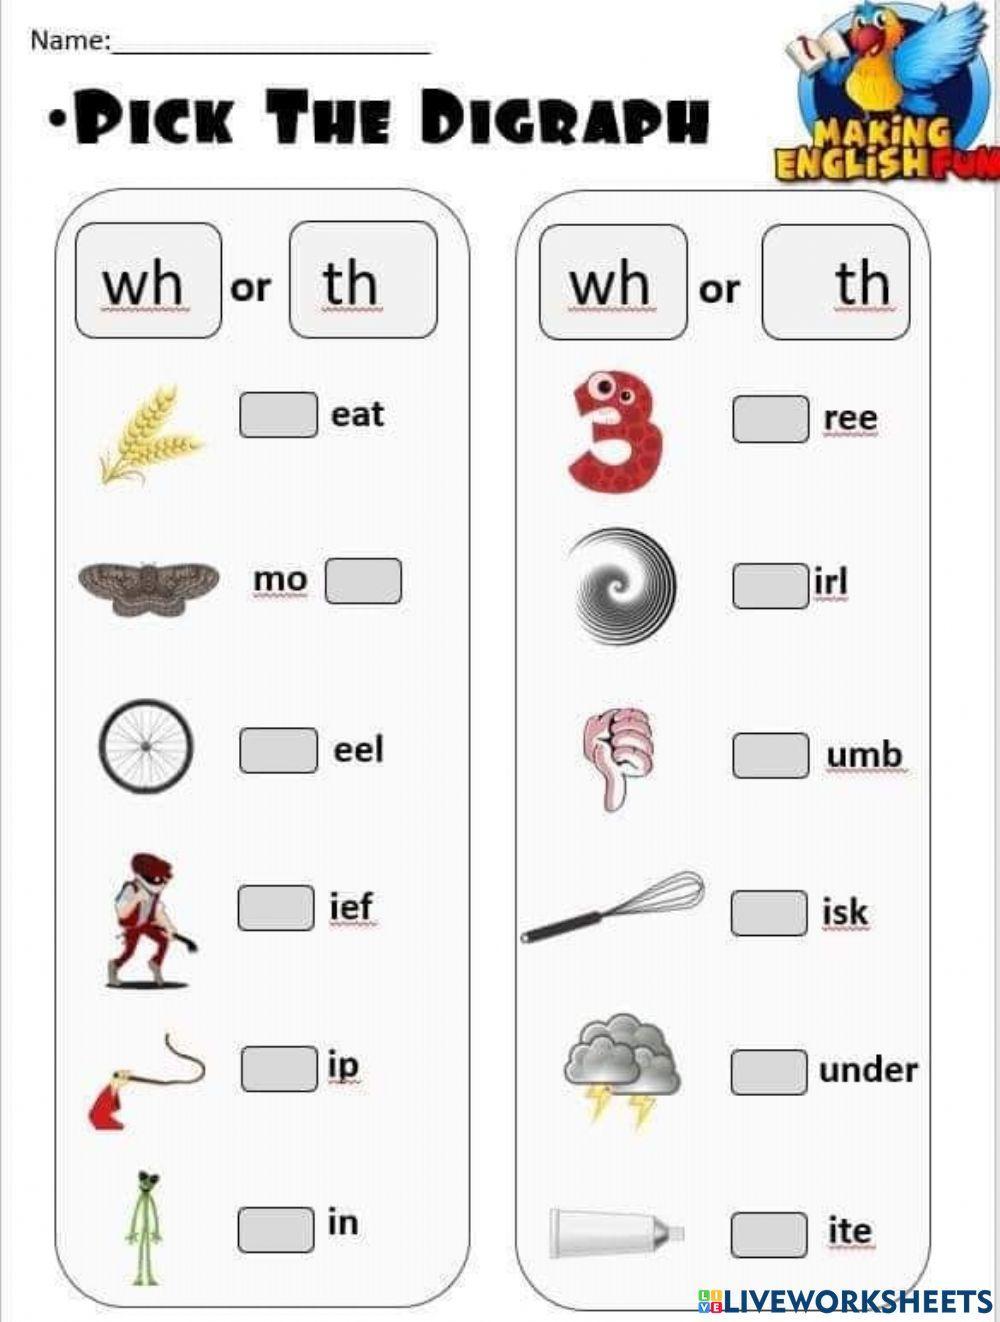 Digraph wh and th